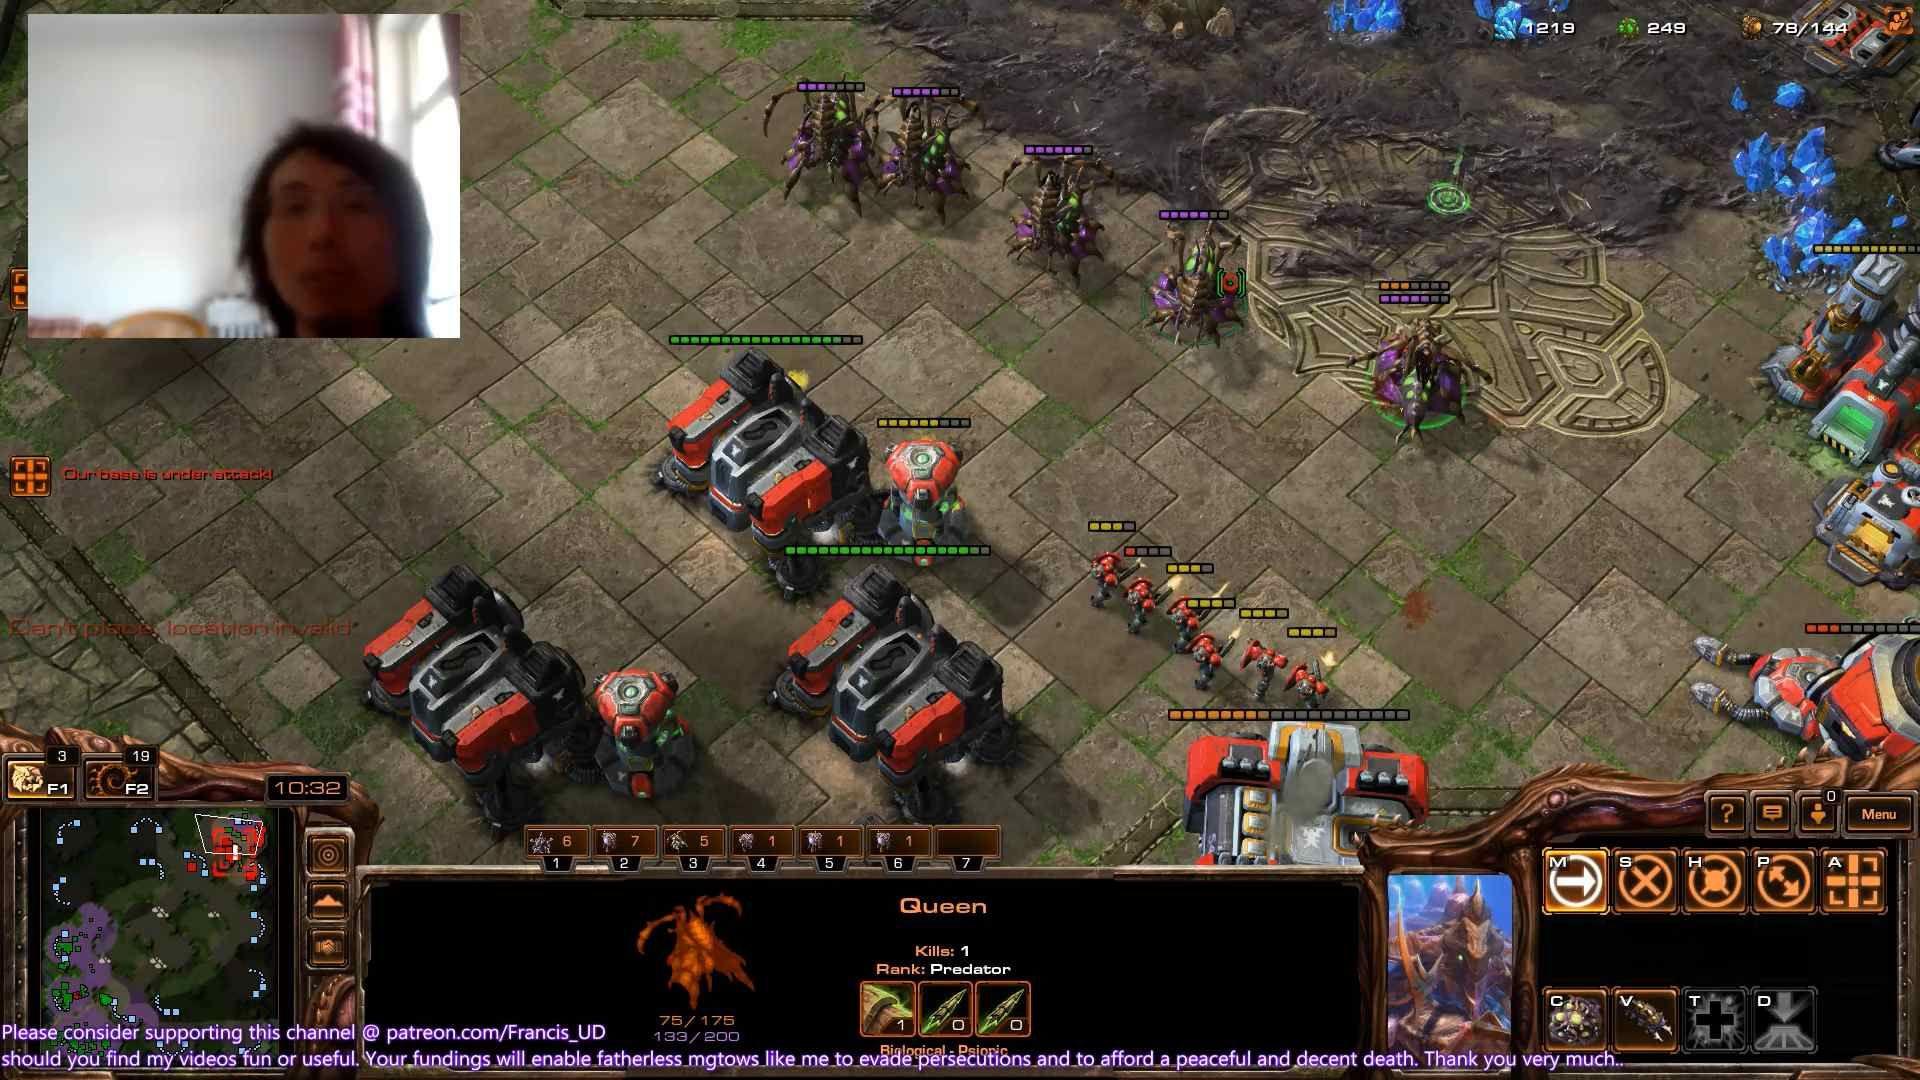 starcraft2 an exciting zvt on ancient cistern banelings & nydus worms crazy combo